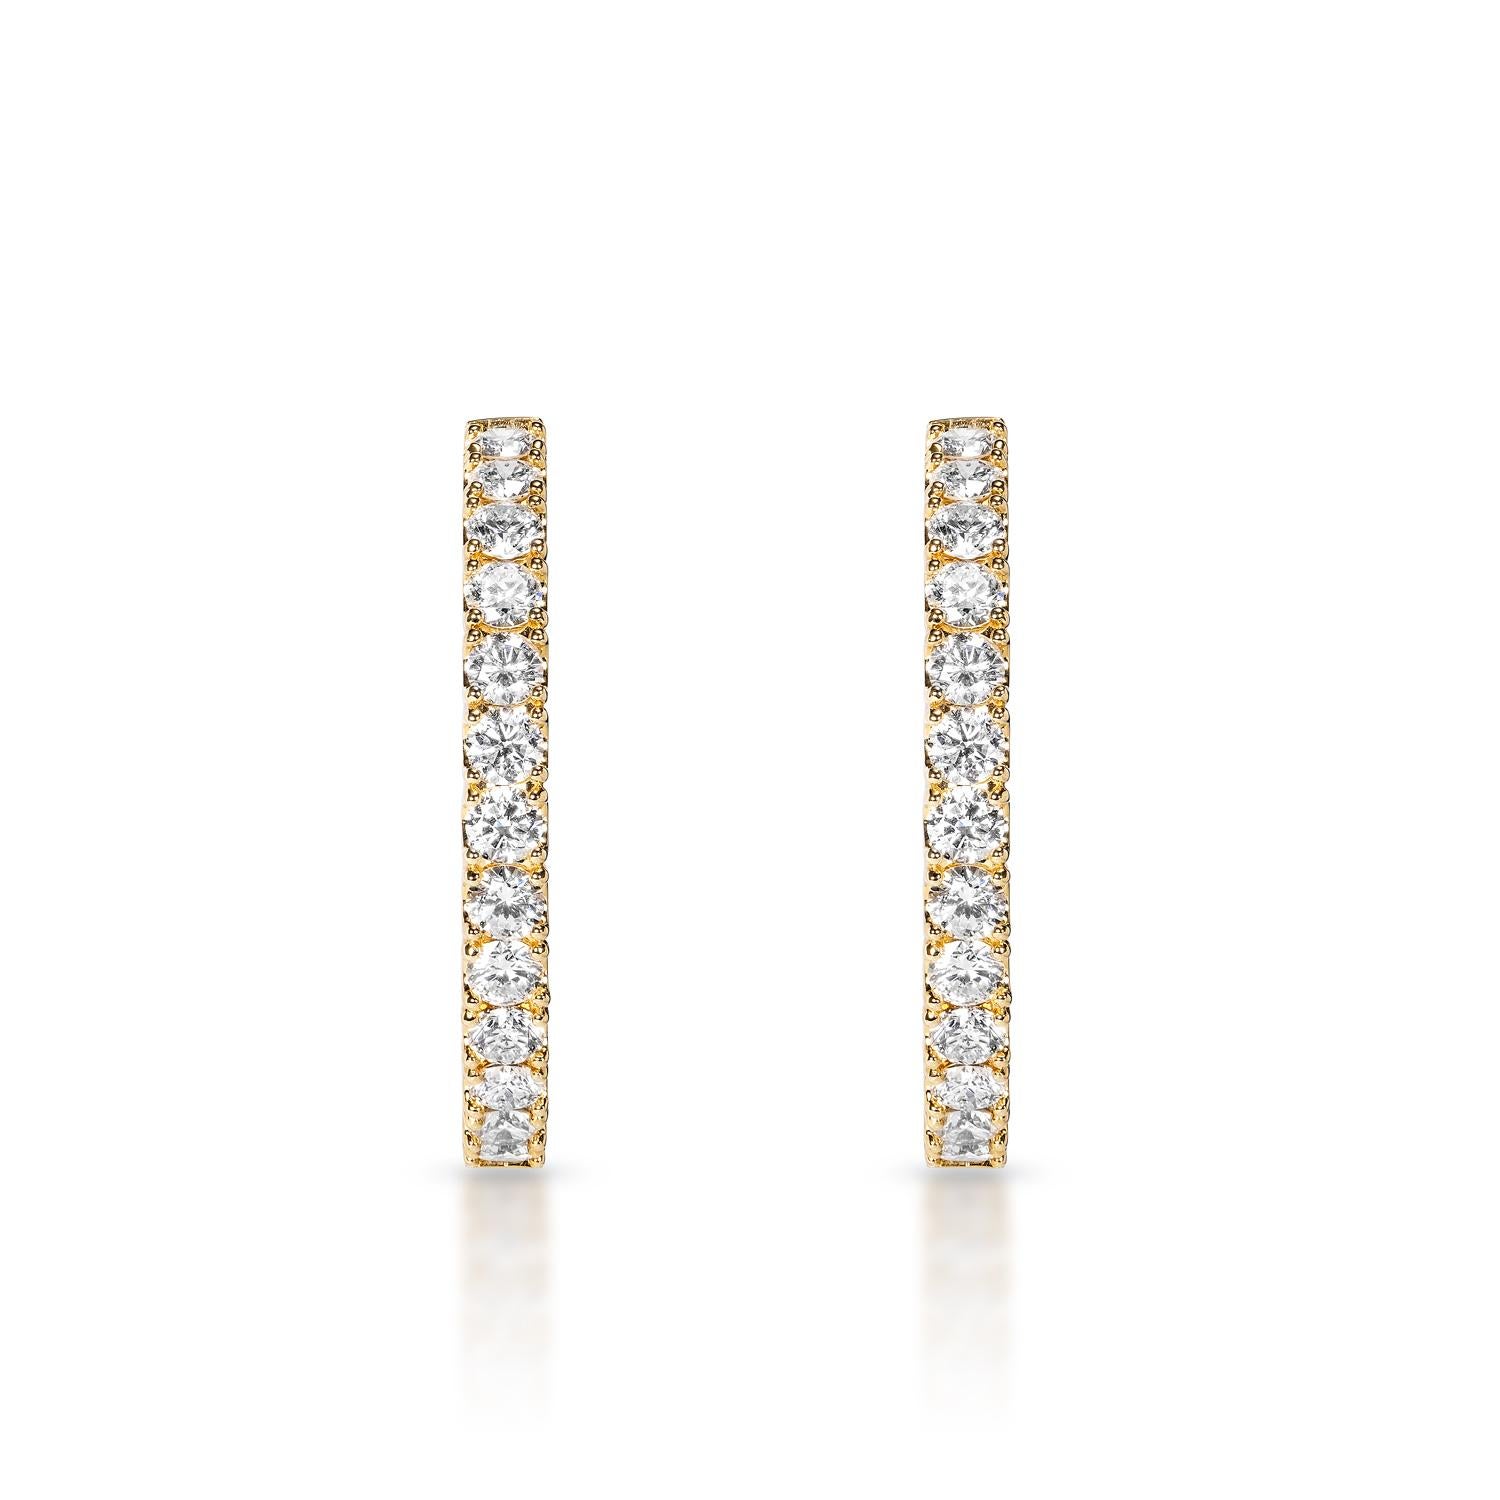 Round Cut 9 Carat Round Brilliant 1.5 inch Diamond Hoop Earrings Certified For Sale